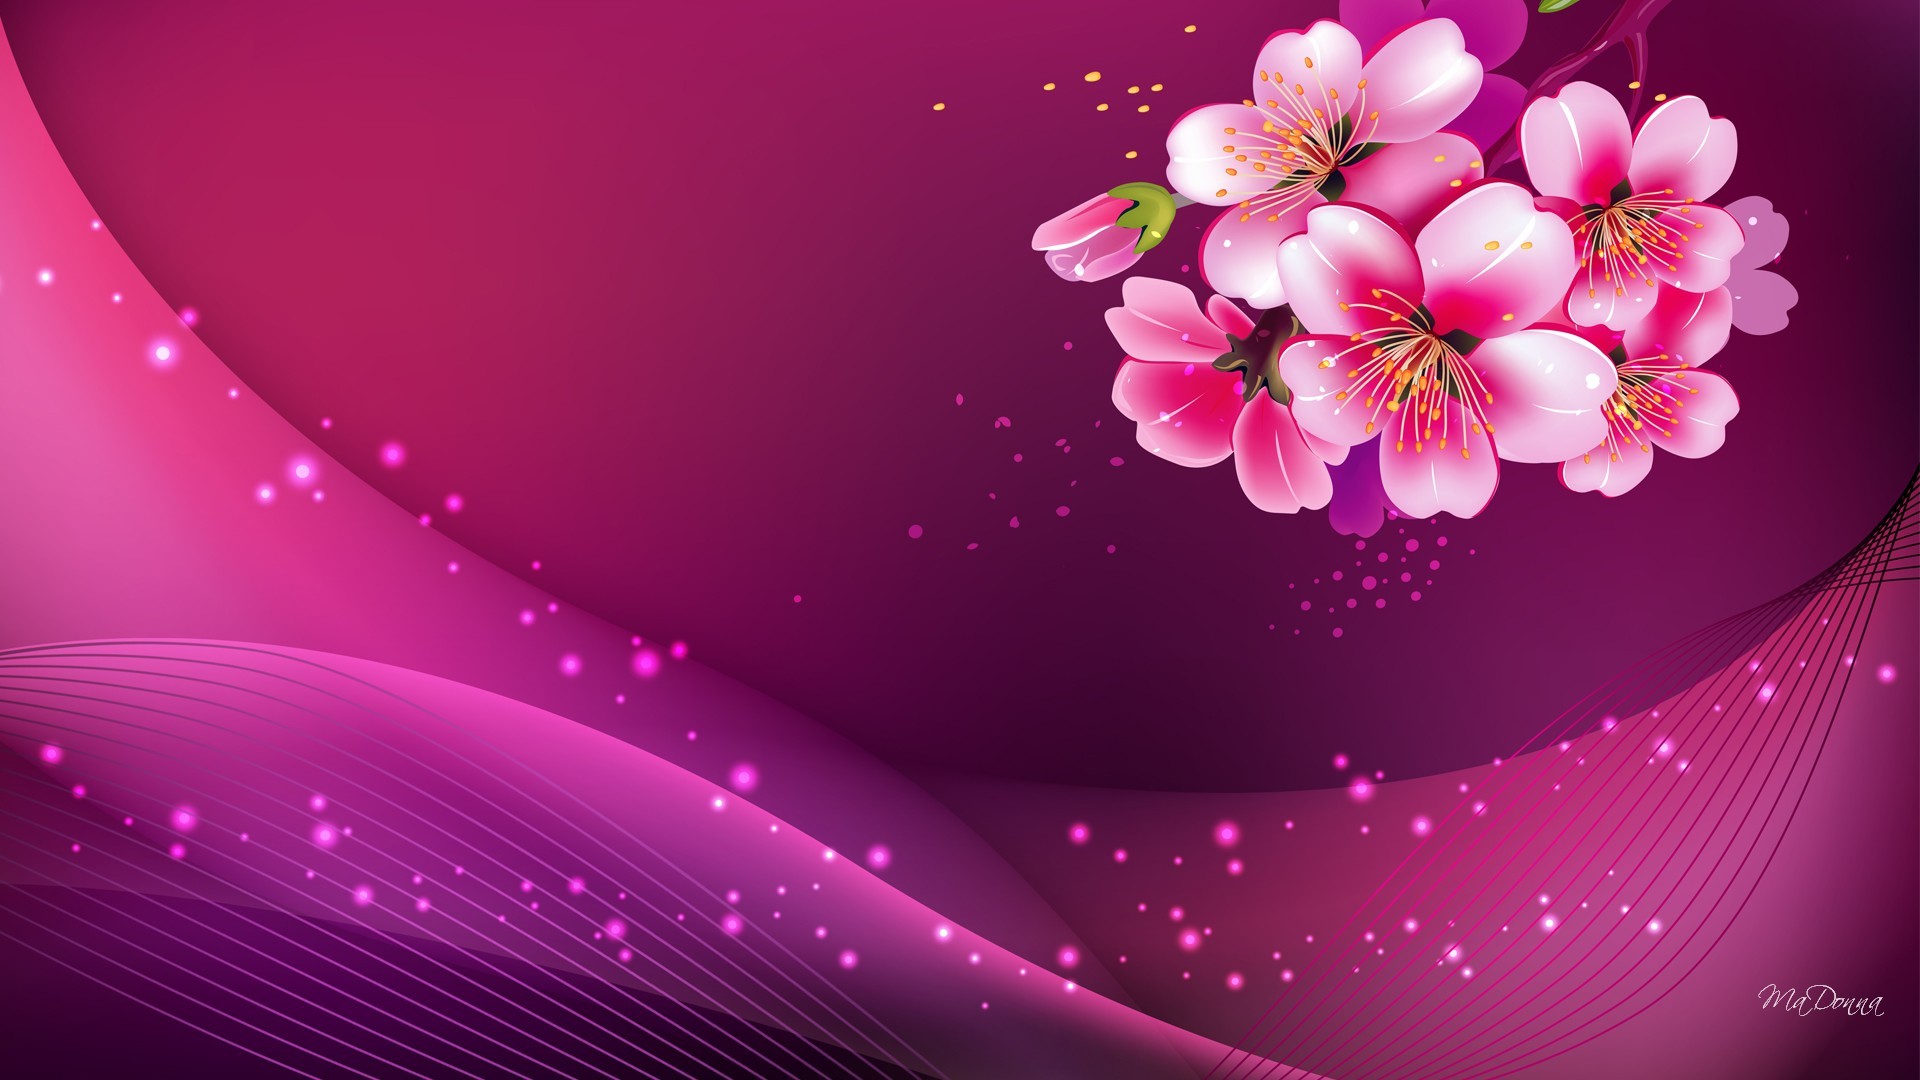 1920x1080 widescreen pink background hd image pc Colour Pink Pinterest